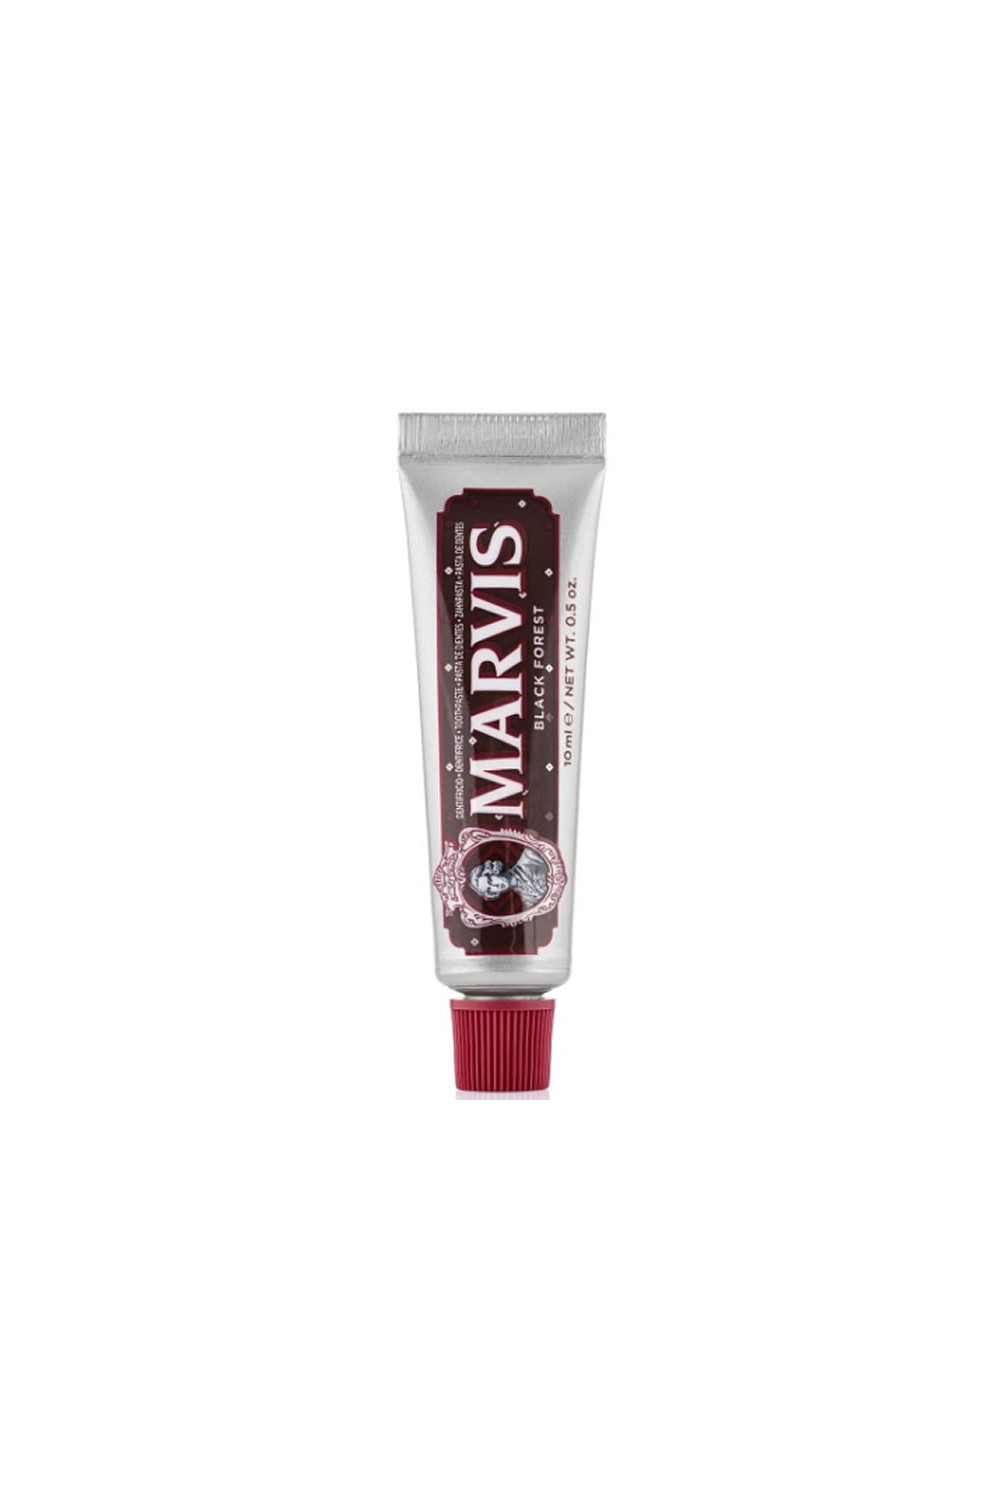 Marvis Black Forest Toothpaste 10ml